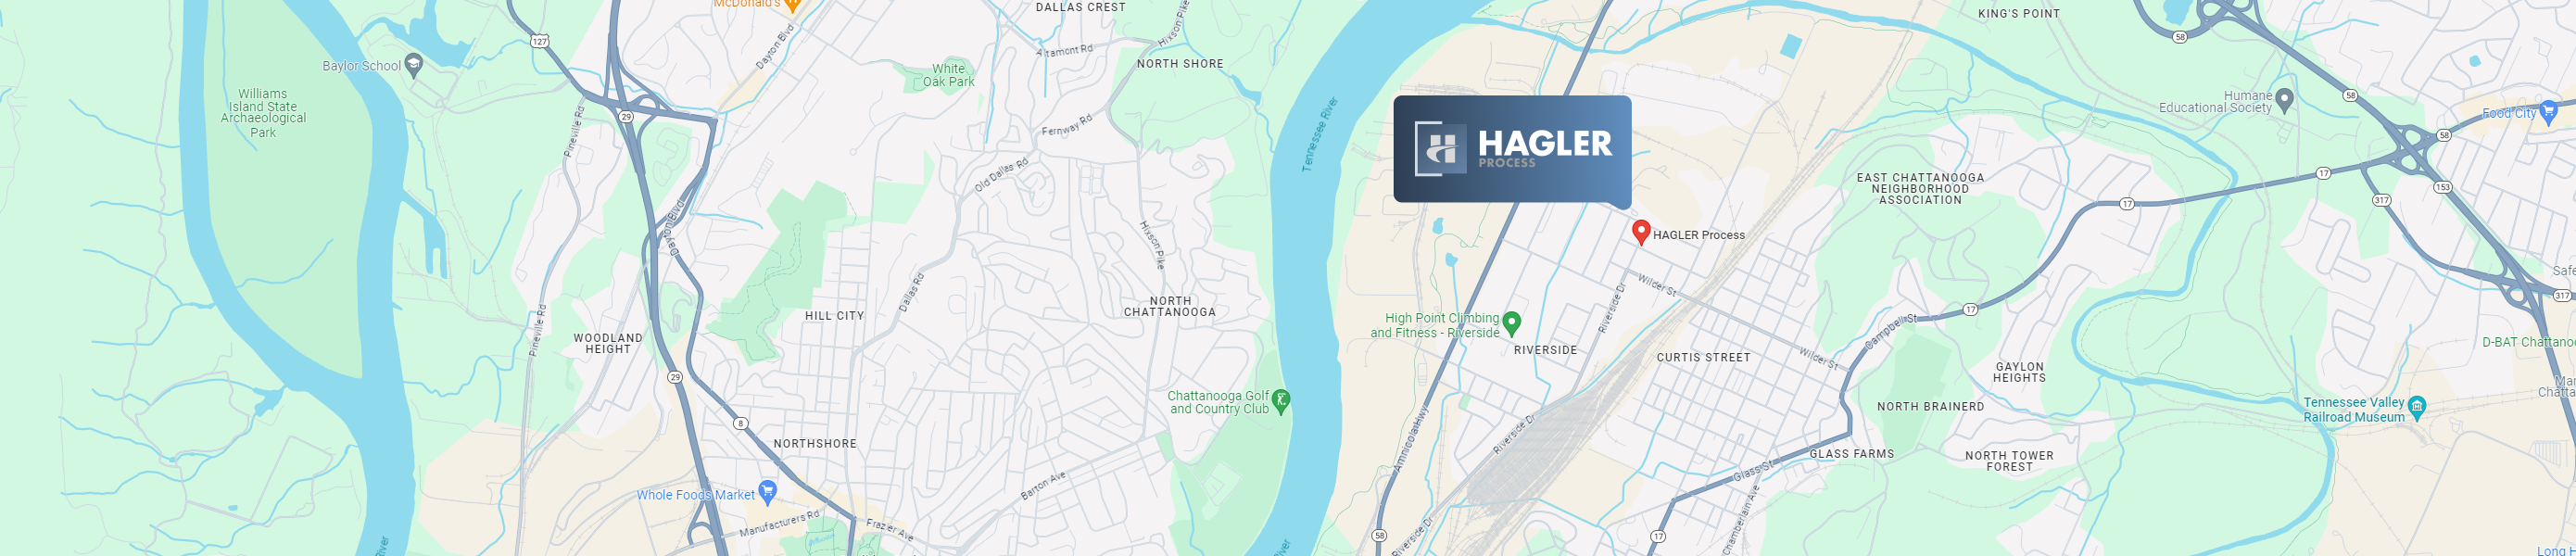 A map of Hagler's location in Chattanooga's Riverside